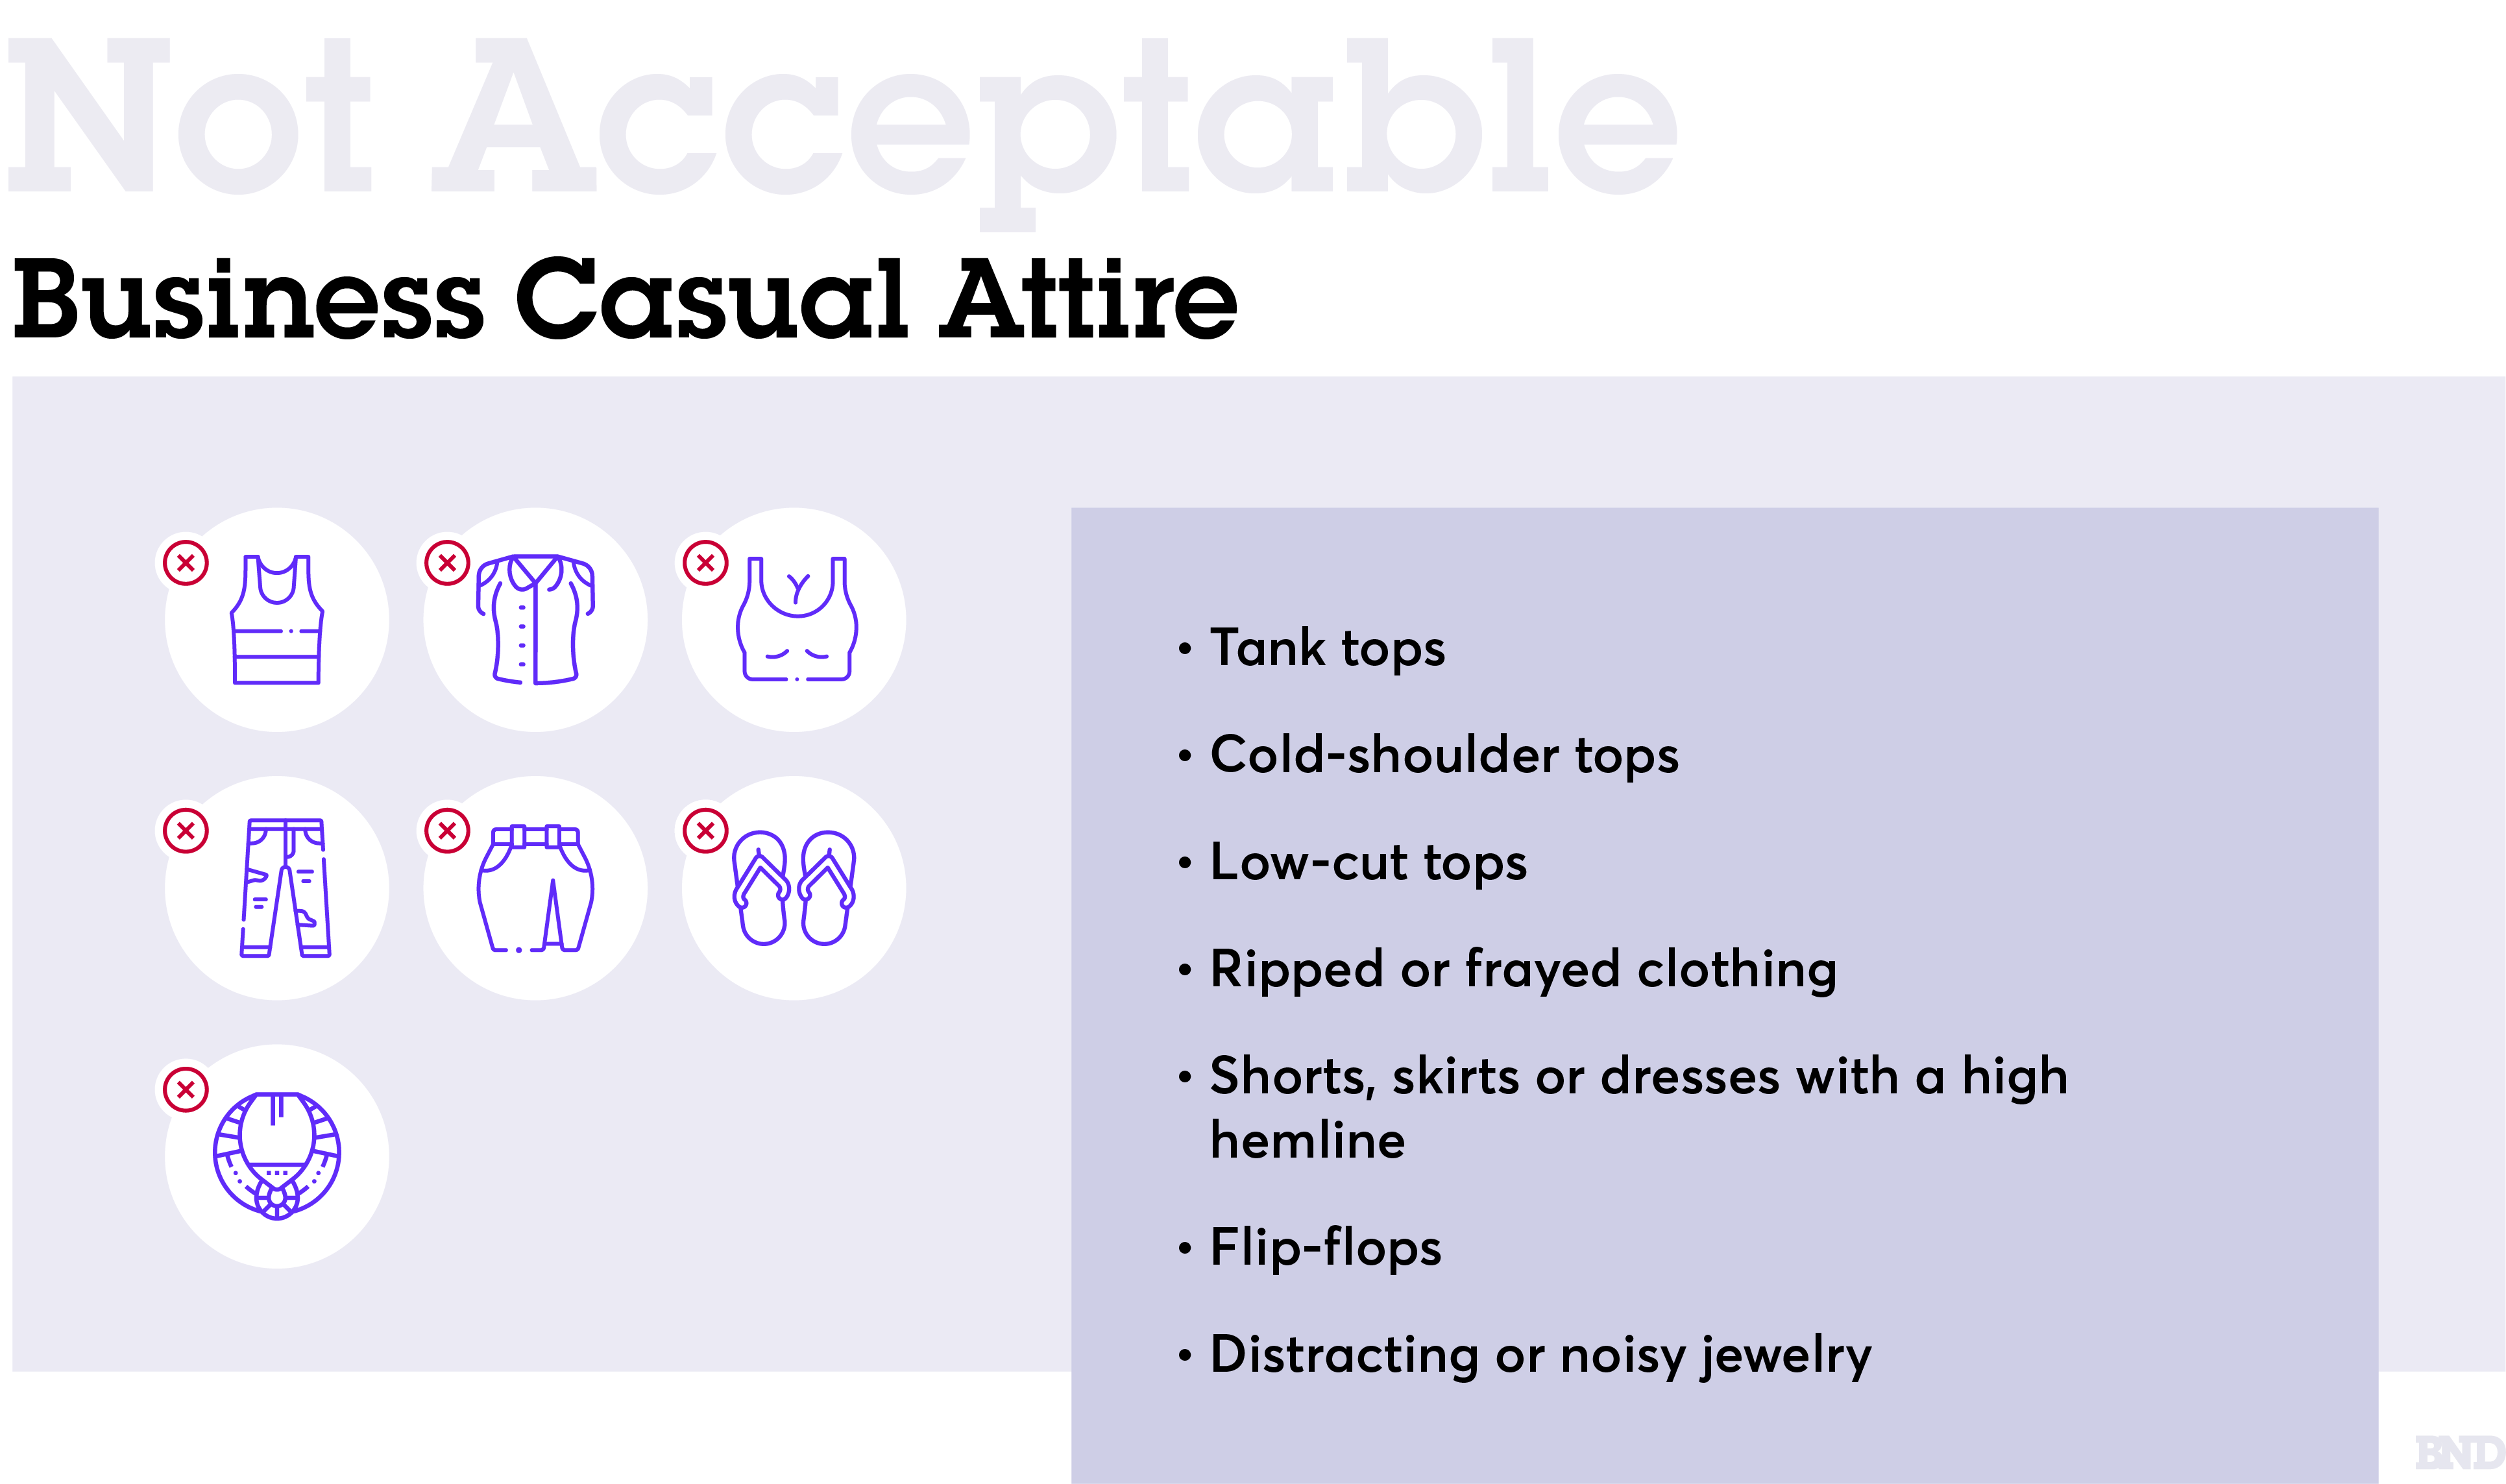 Infographic detailing not acceptable business attire